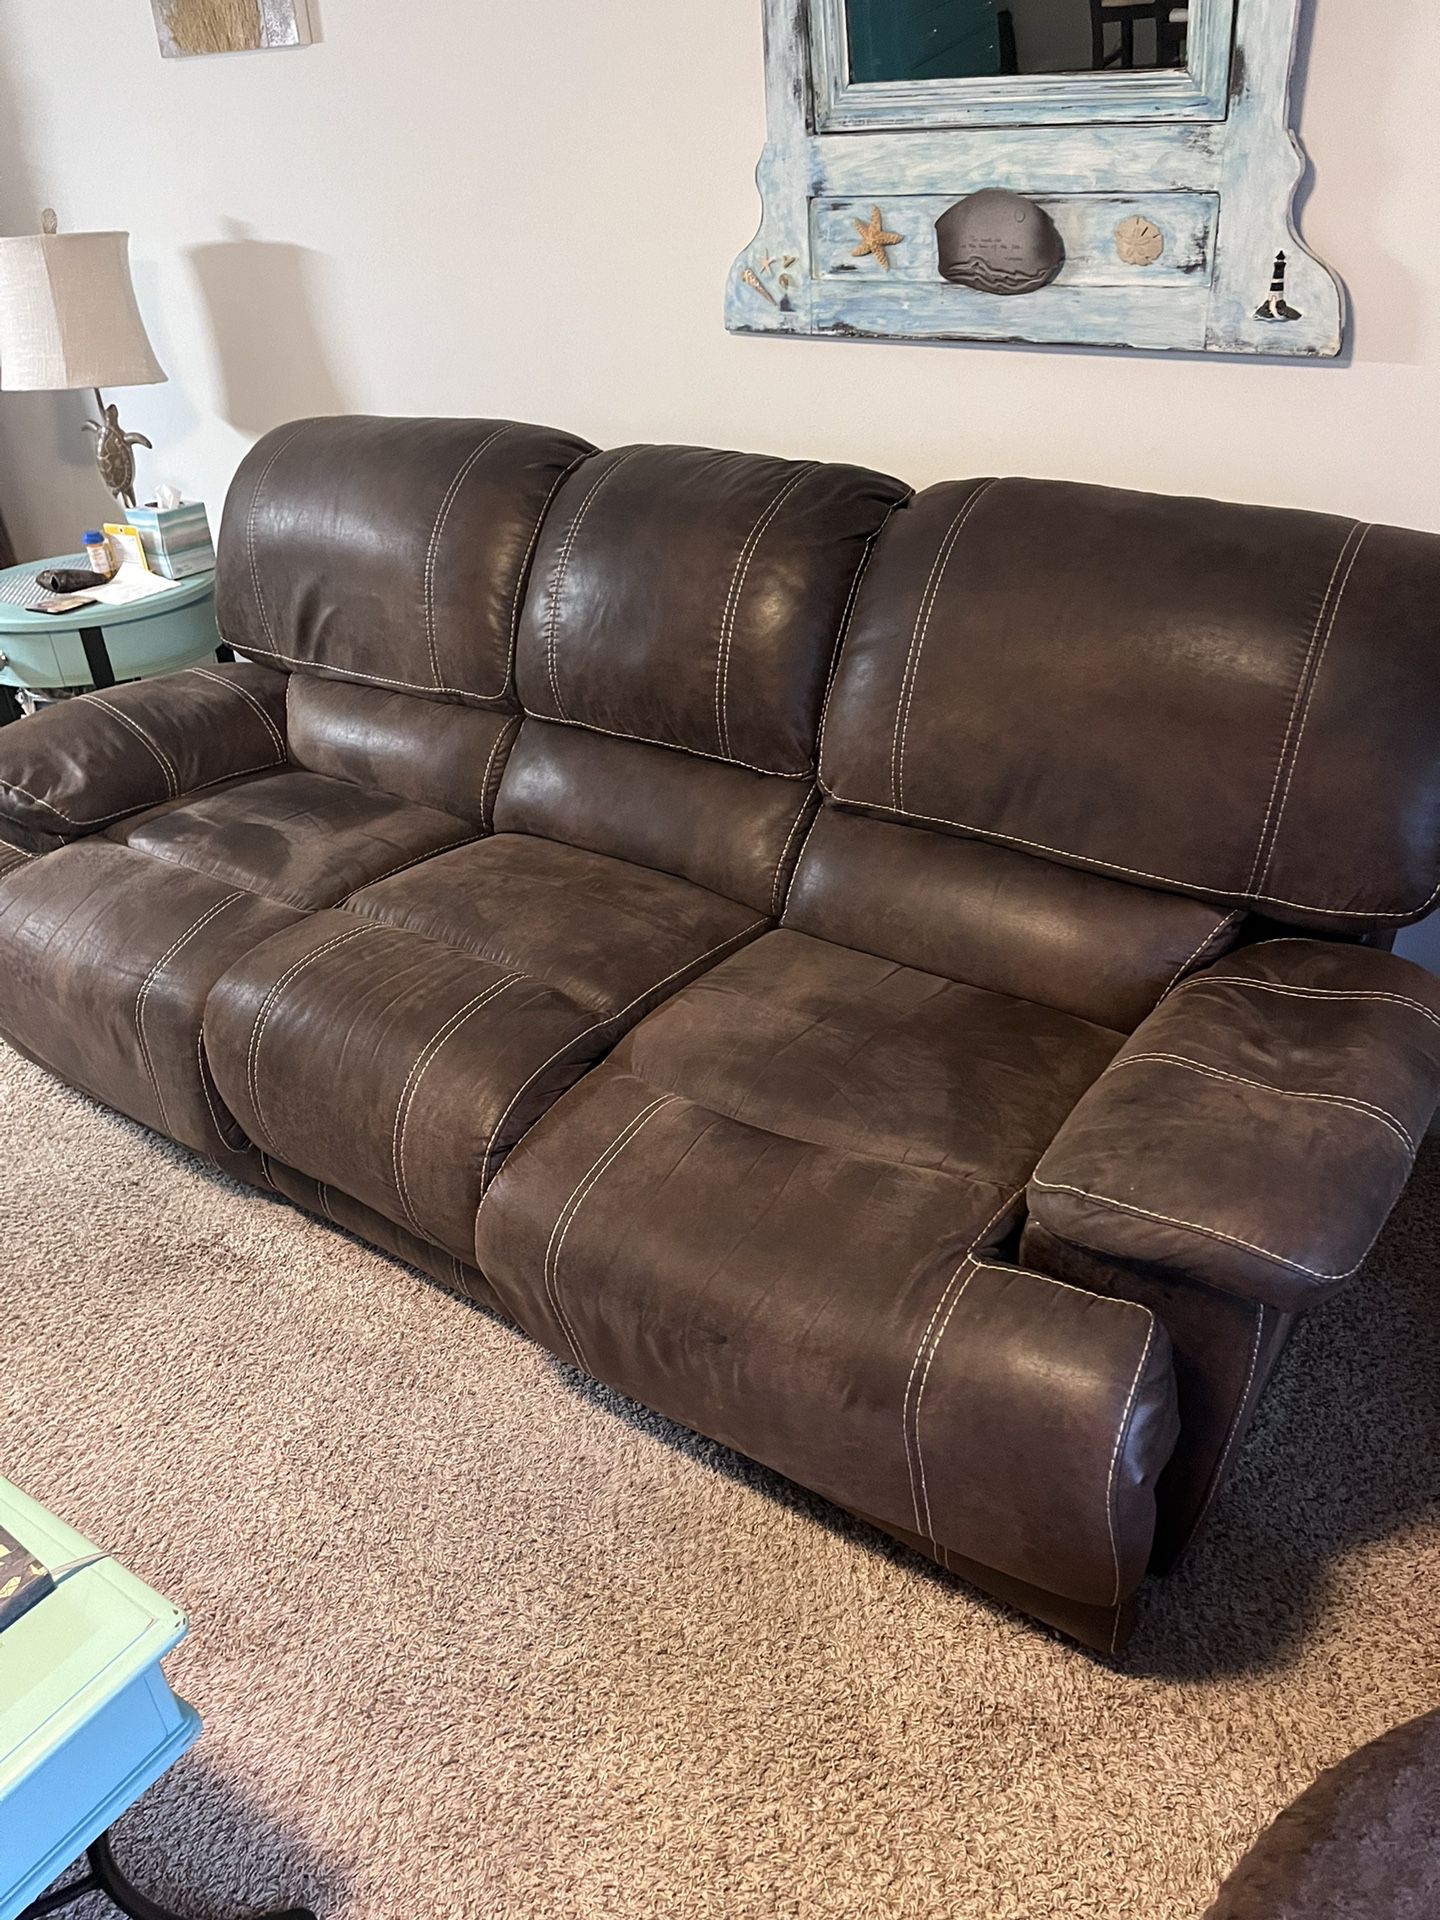 Sofa And Chair With Storage Ottoman